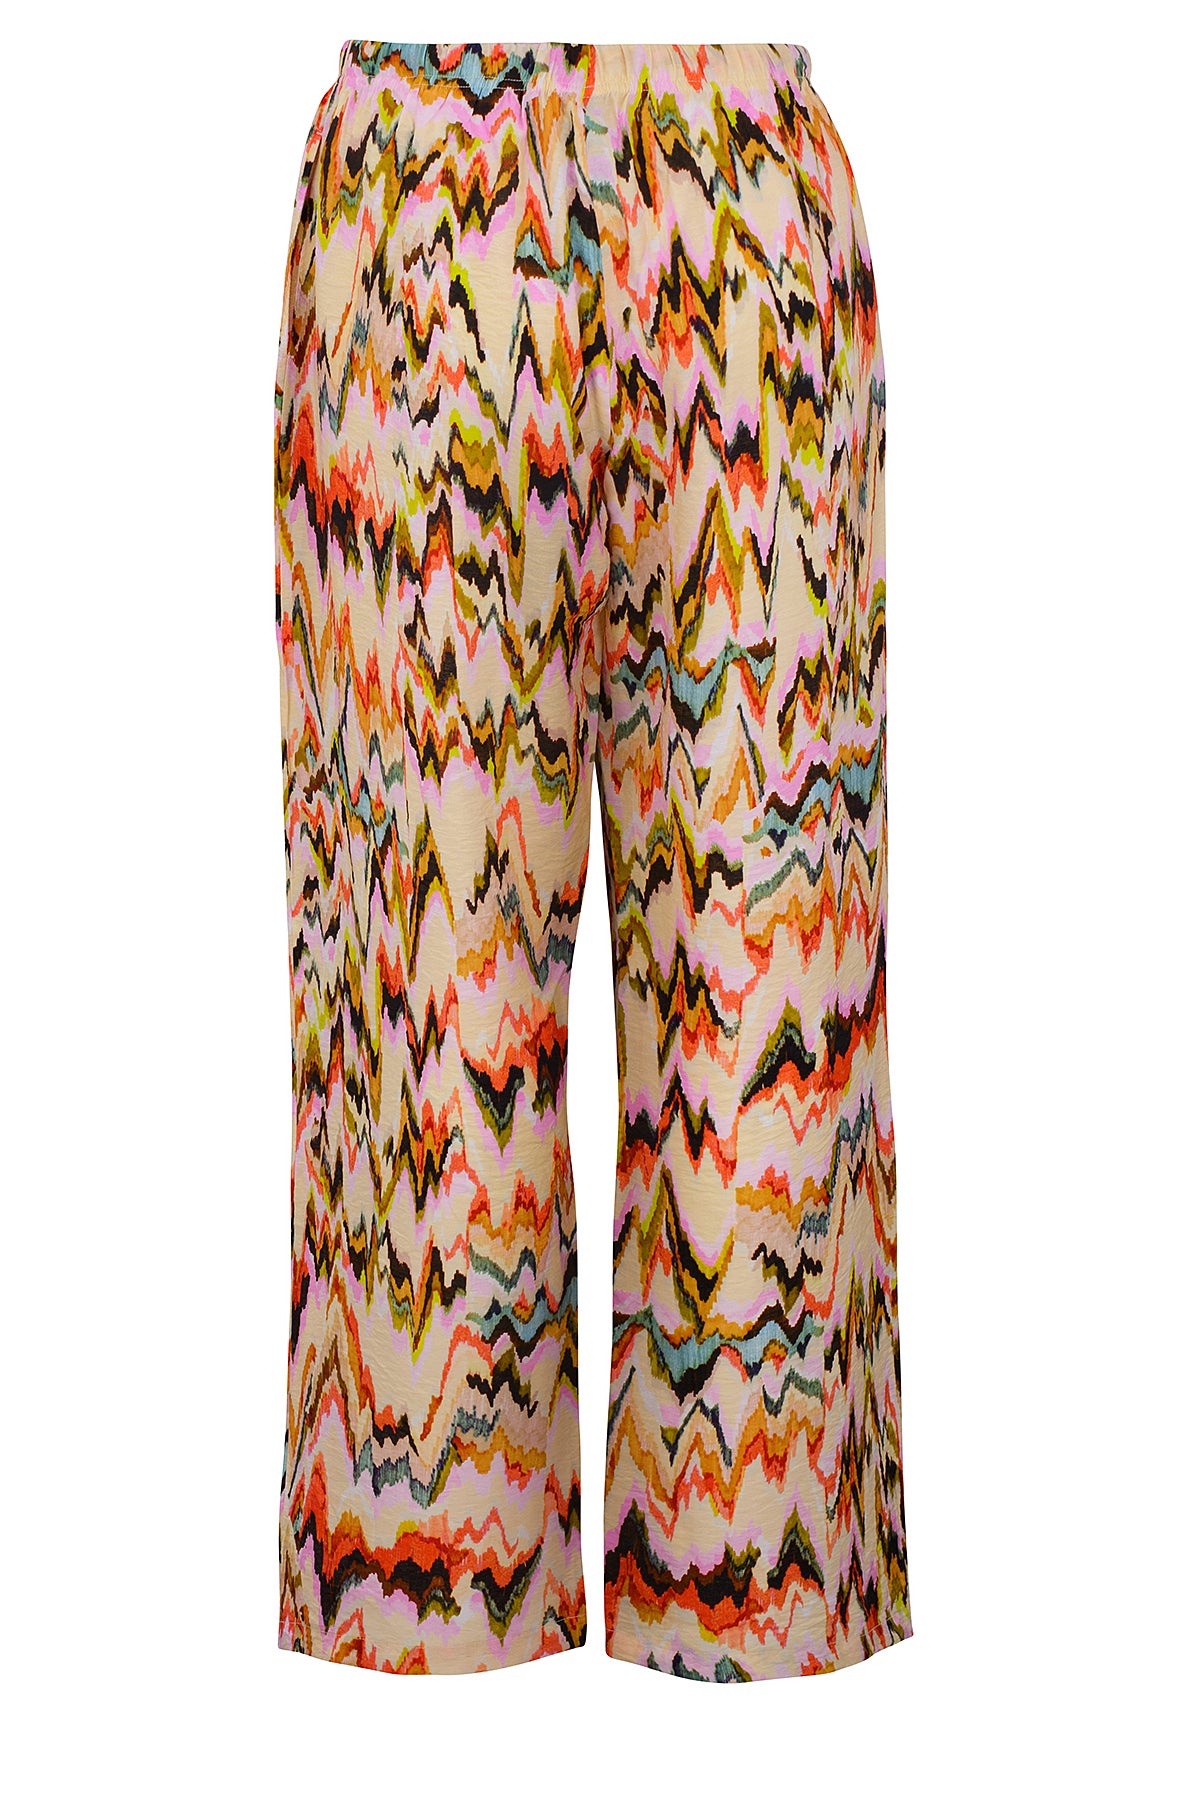 LUXZUZ // ONE TWO Elizag Pant Pant 230 Emberglow